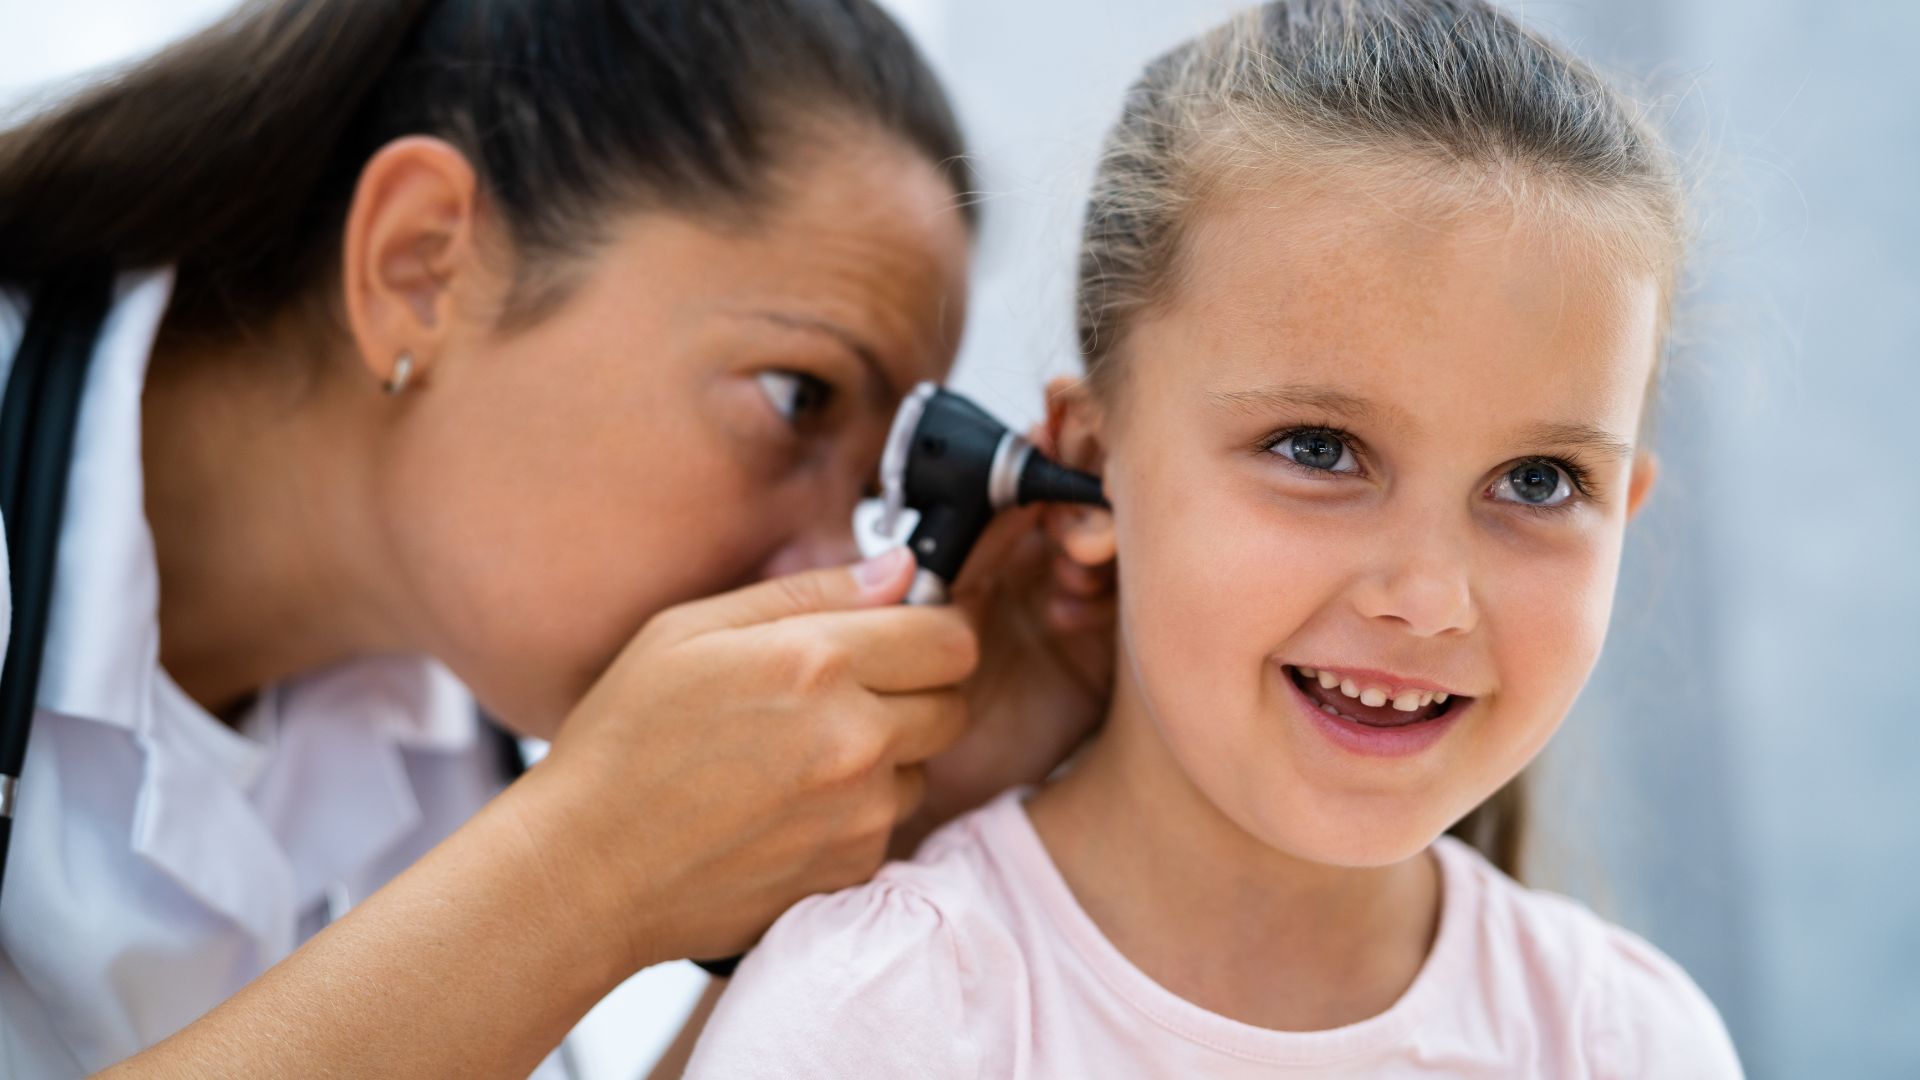 Doctor Using The Tool To Examine The Child's Ear